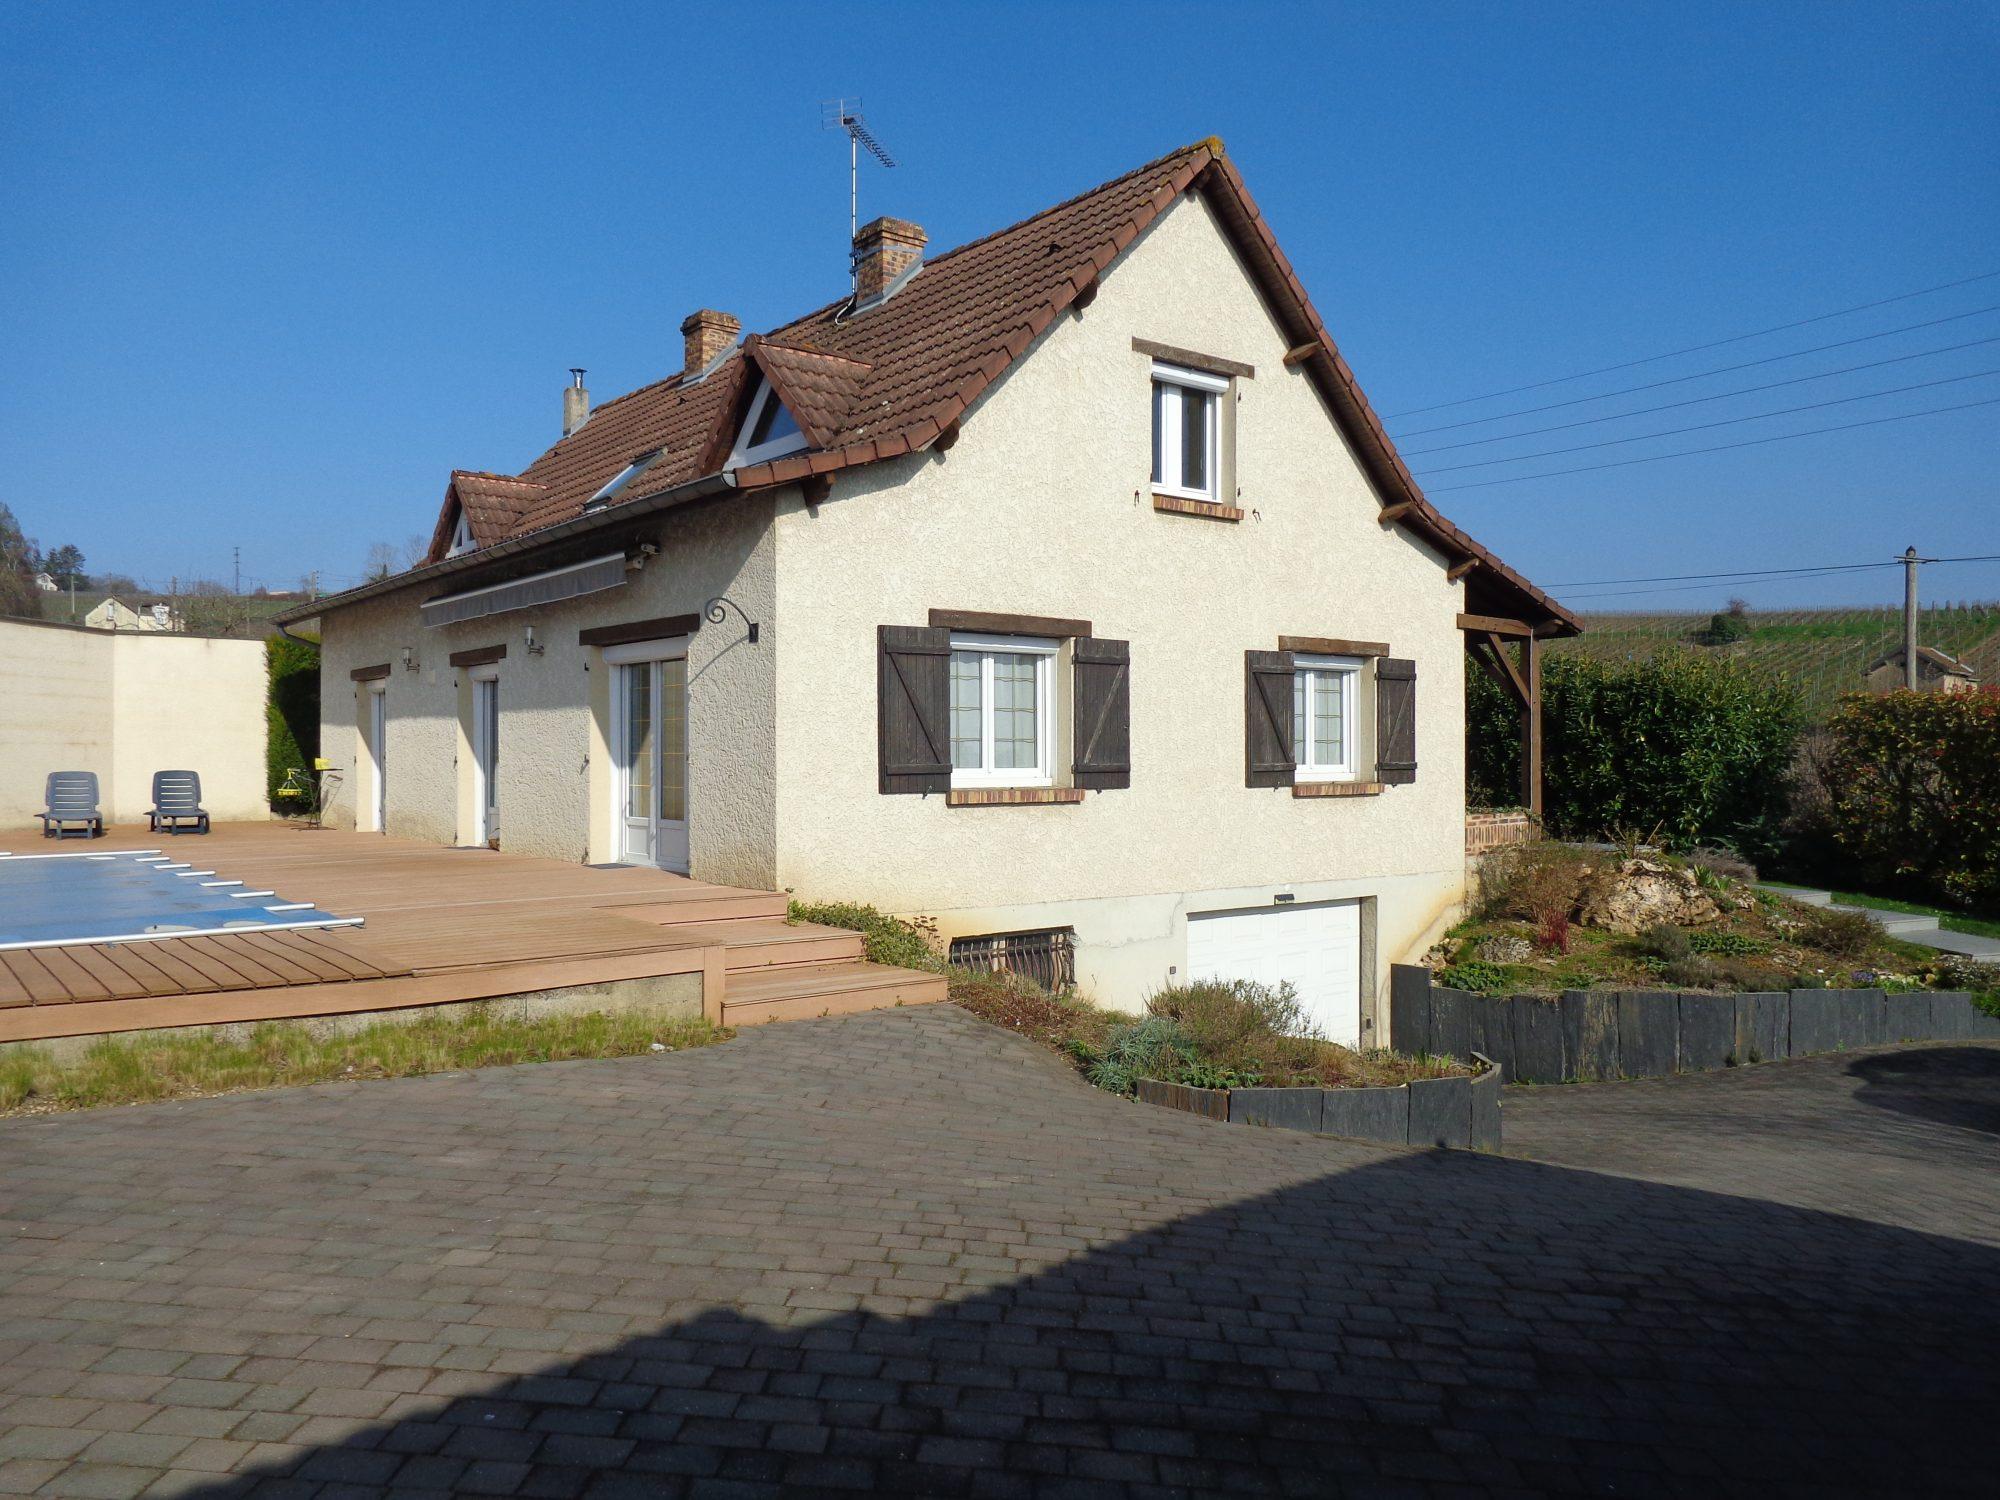 Immobilier vente à EPERNAY Maison - Type 9